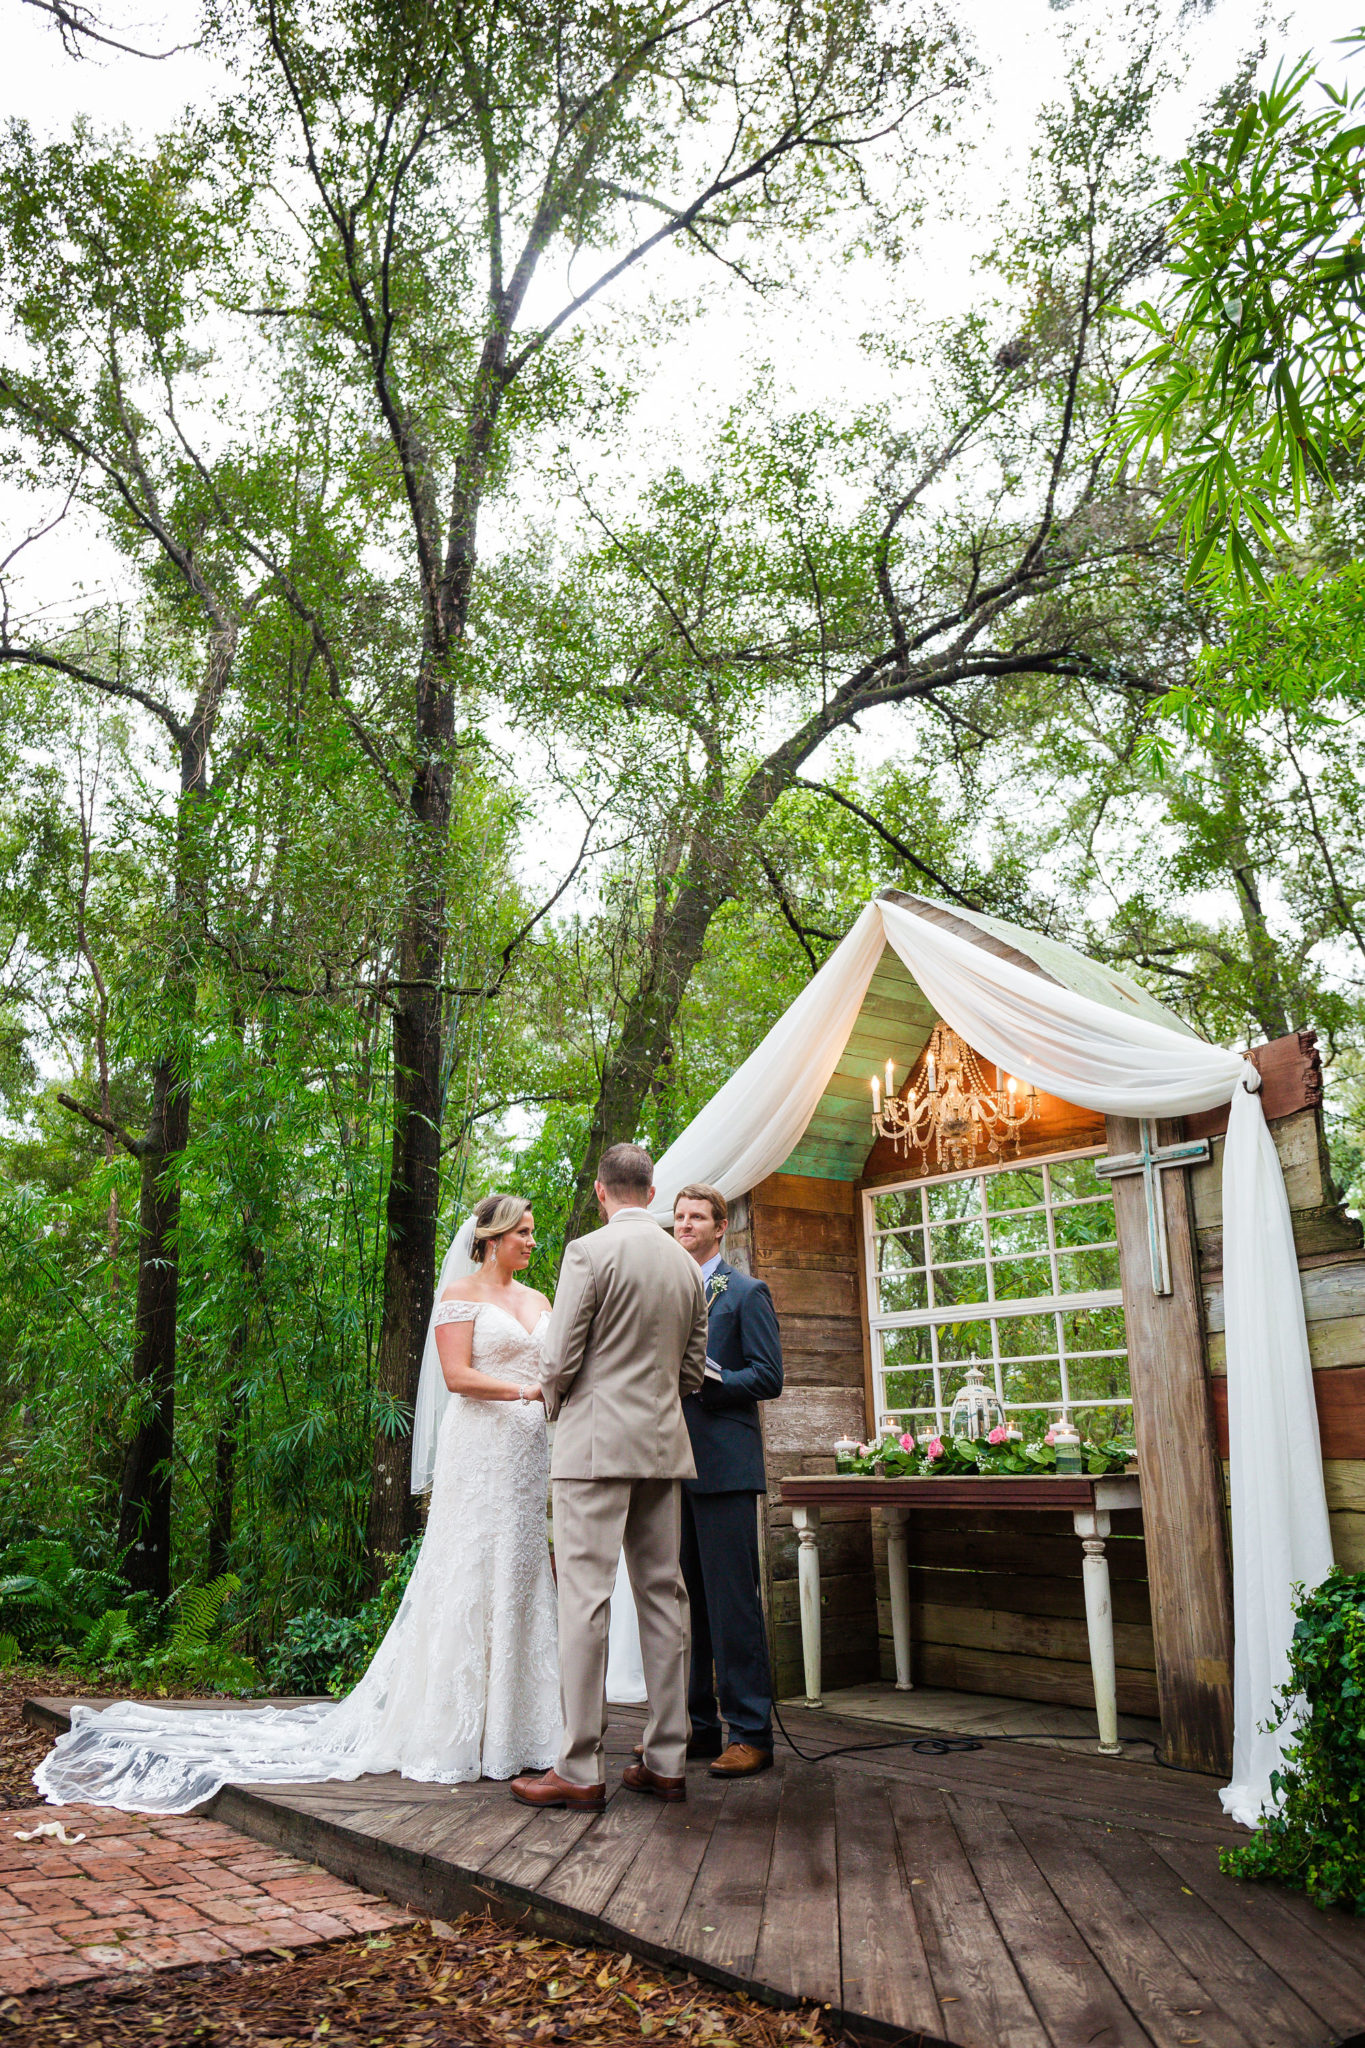 Beautiful natural canopy at Bridle Oaks outdoor ceremony area.